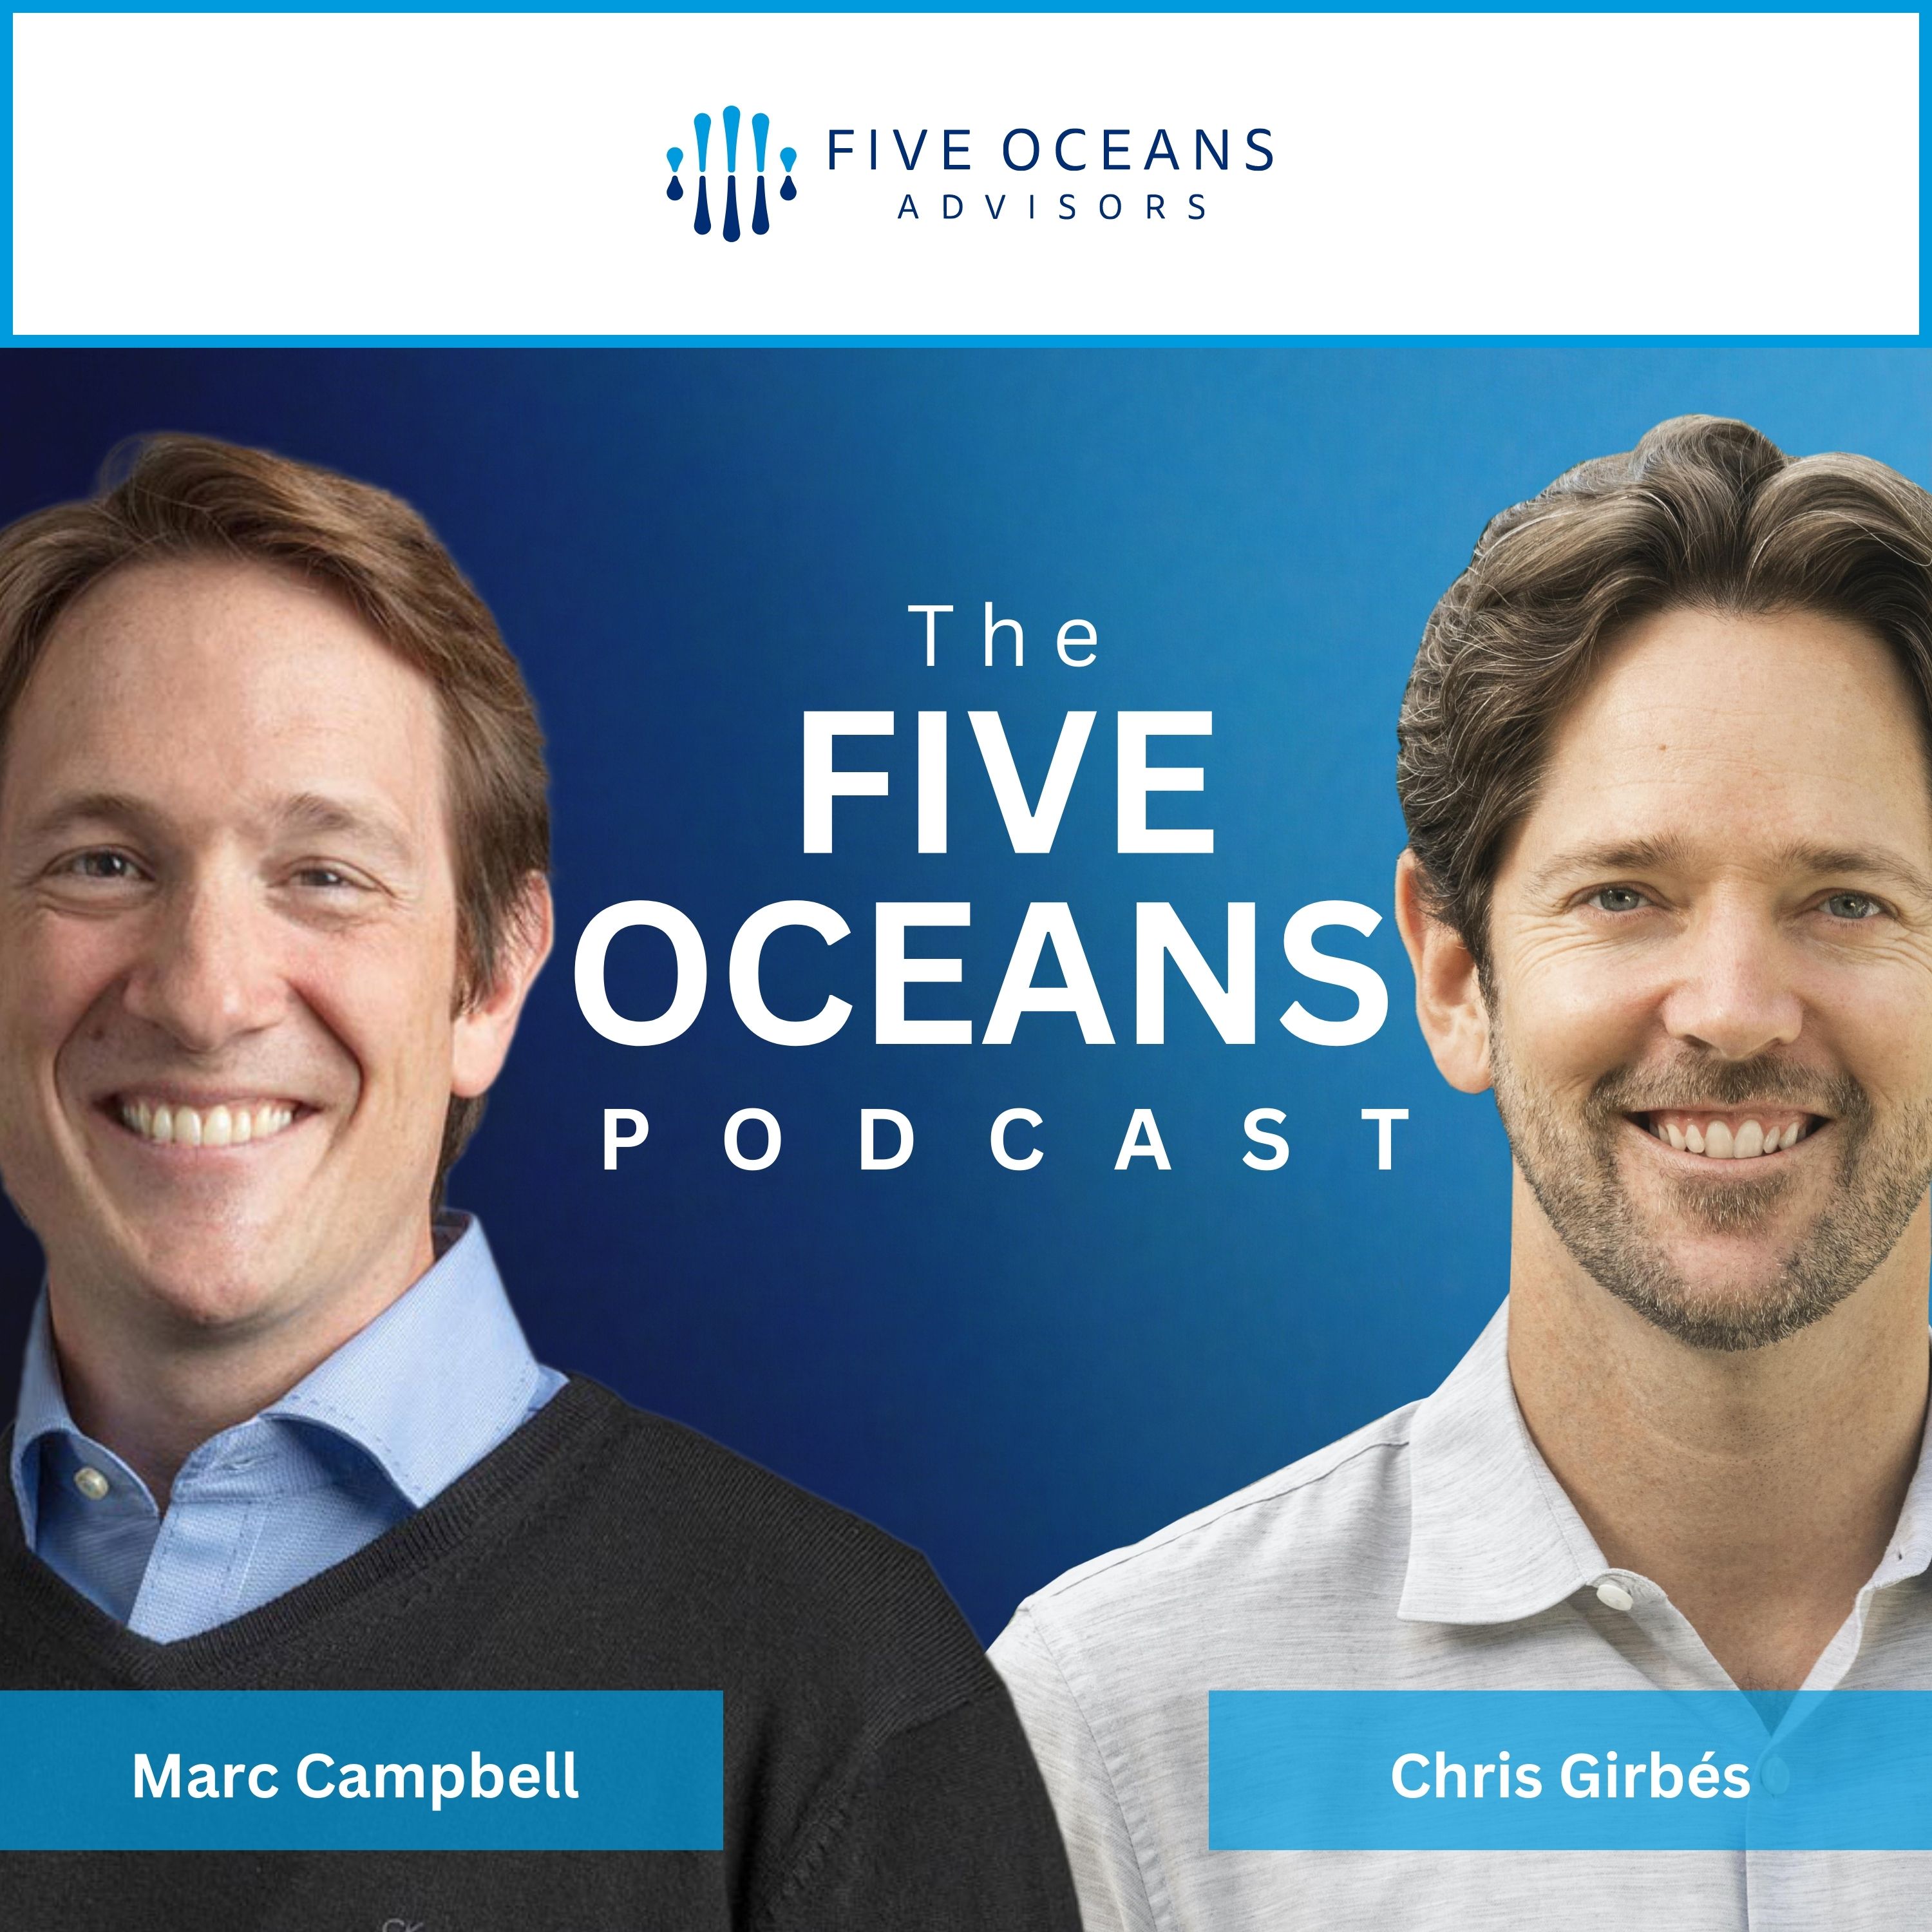 The Five Oceans Podcast